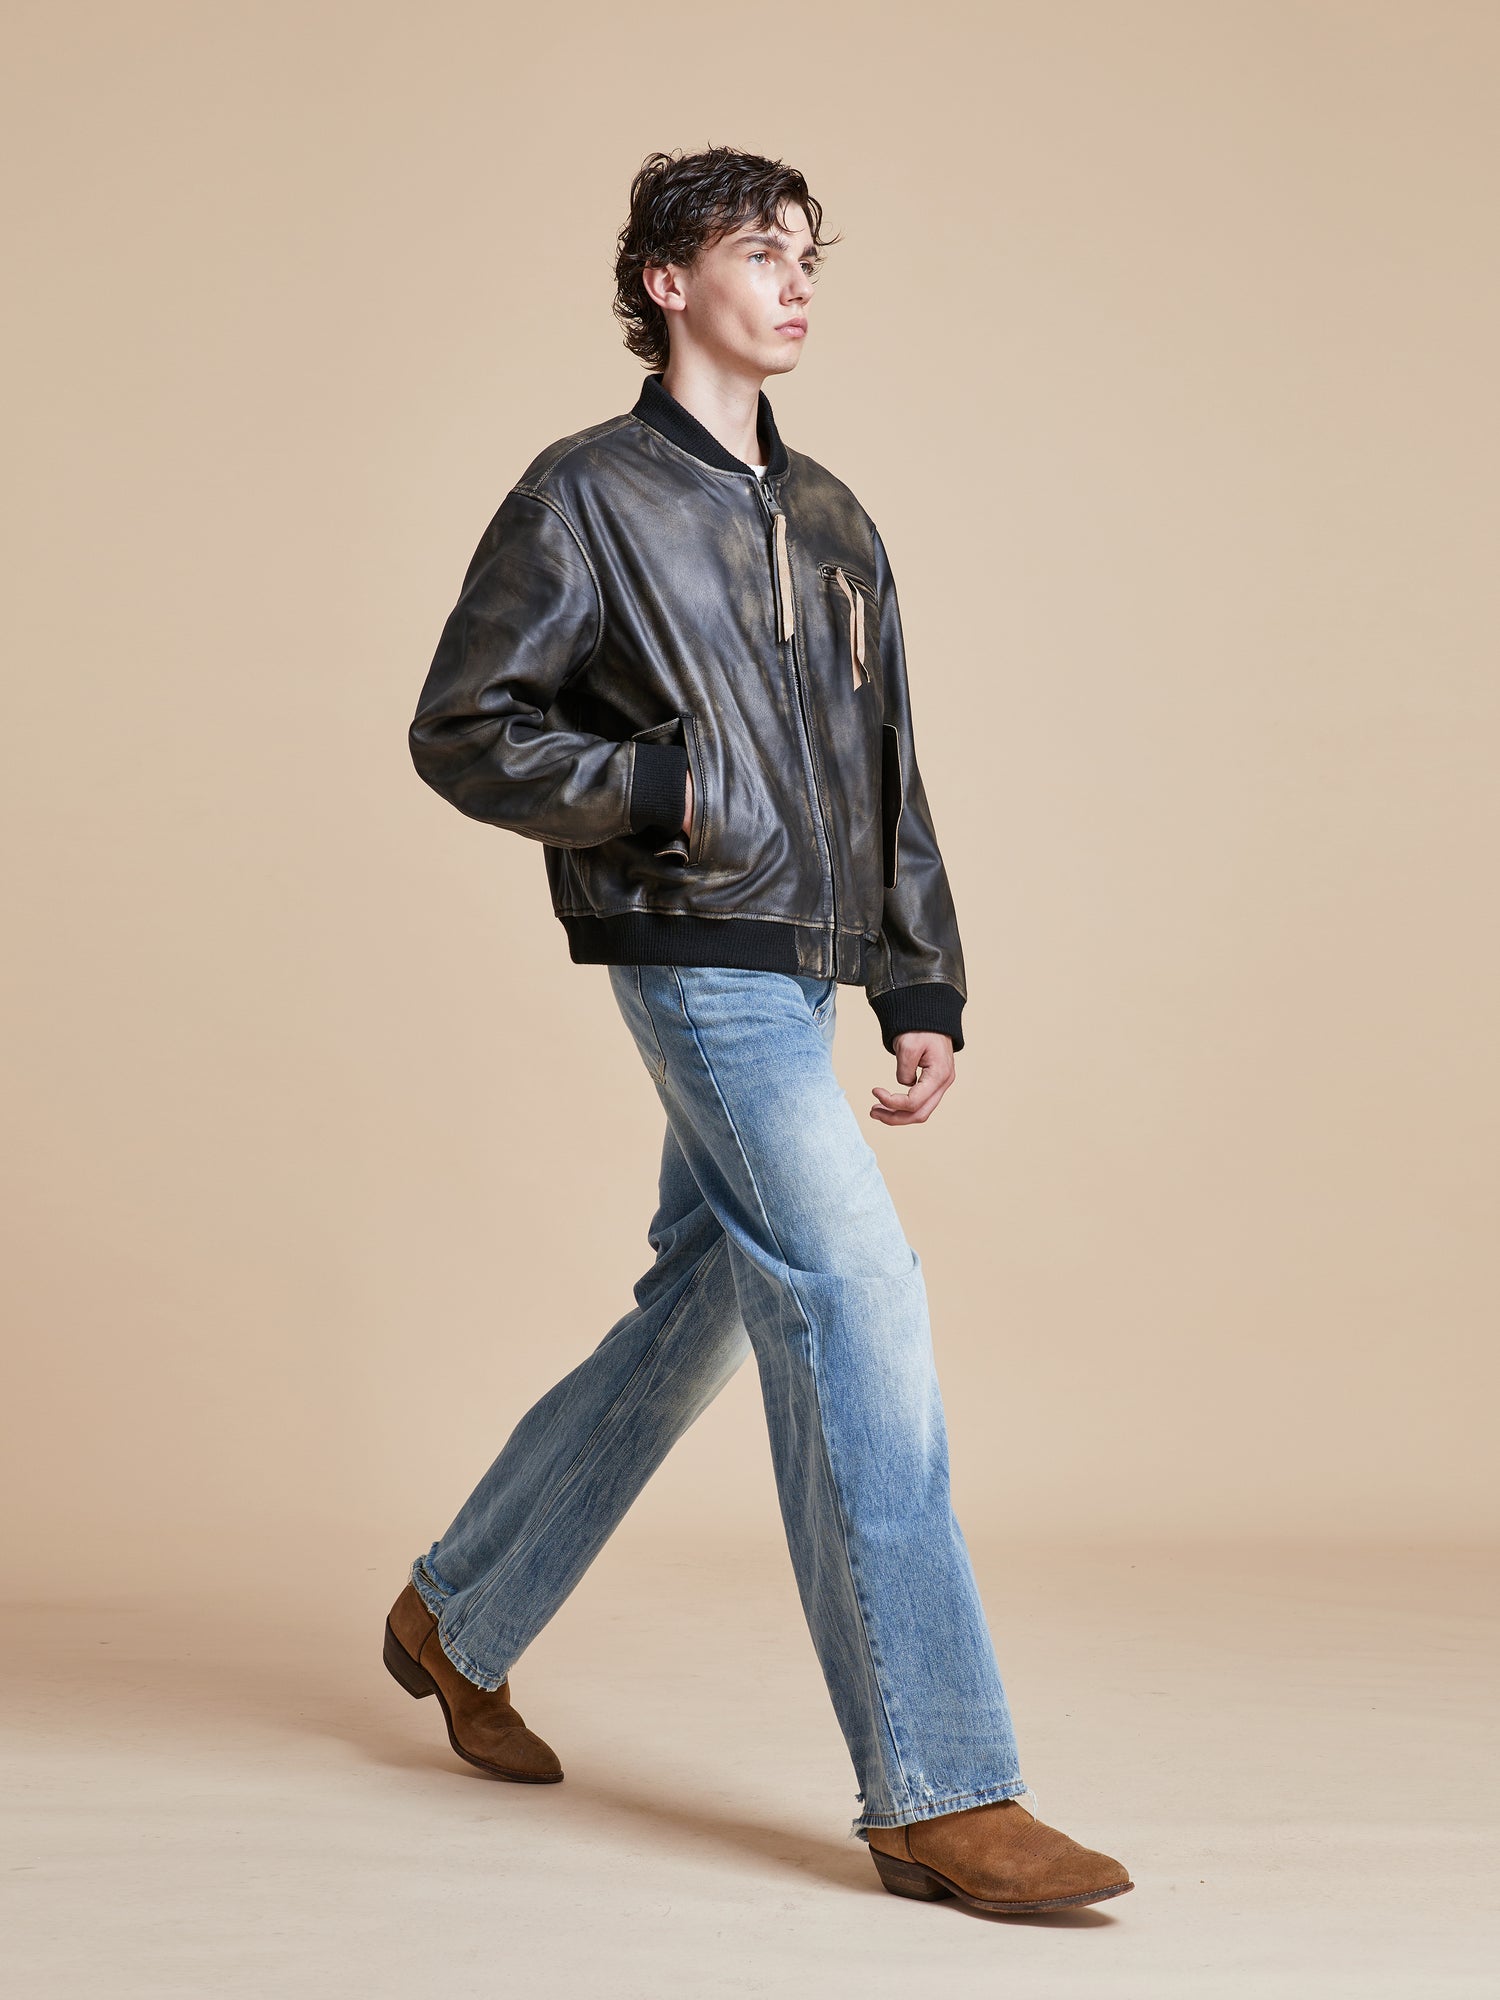 A man in jeans and a Found Distressed Pavement Leather Bomber Jacket walking on a beige background.